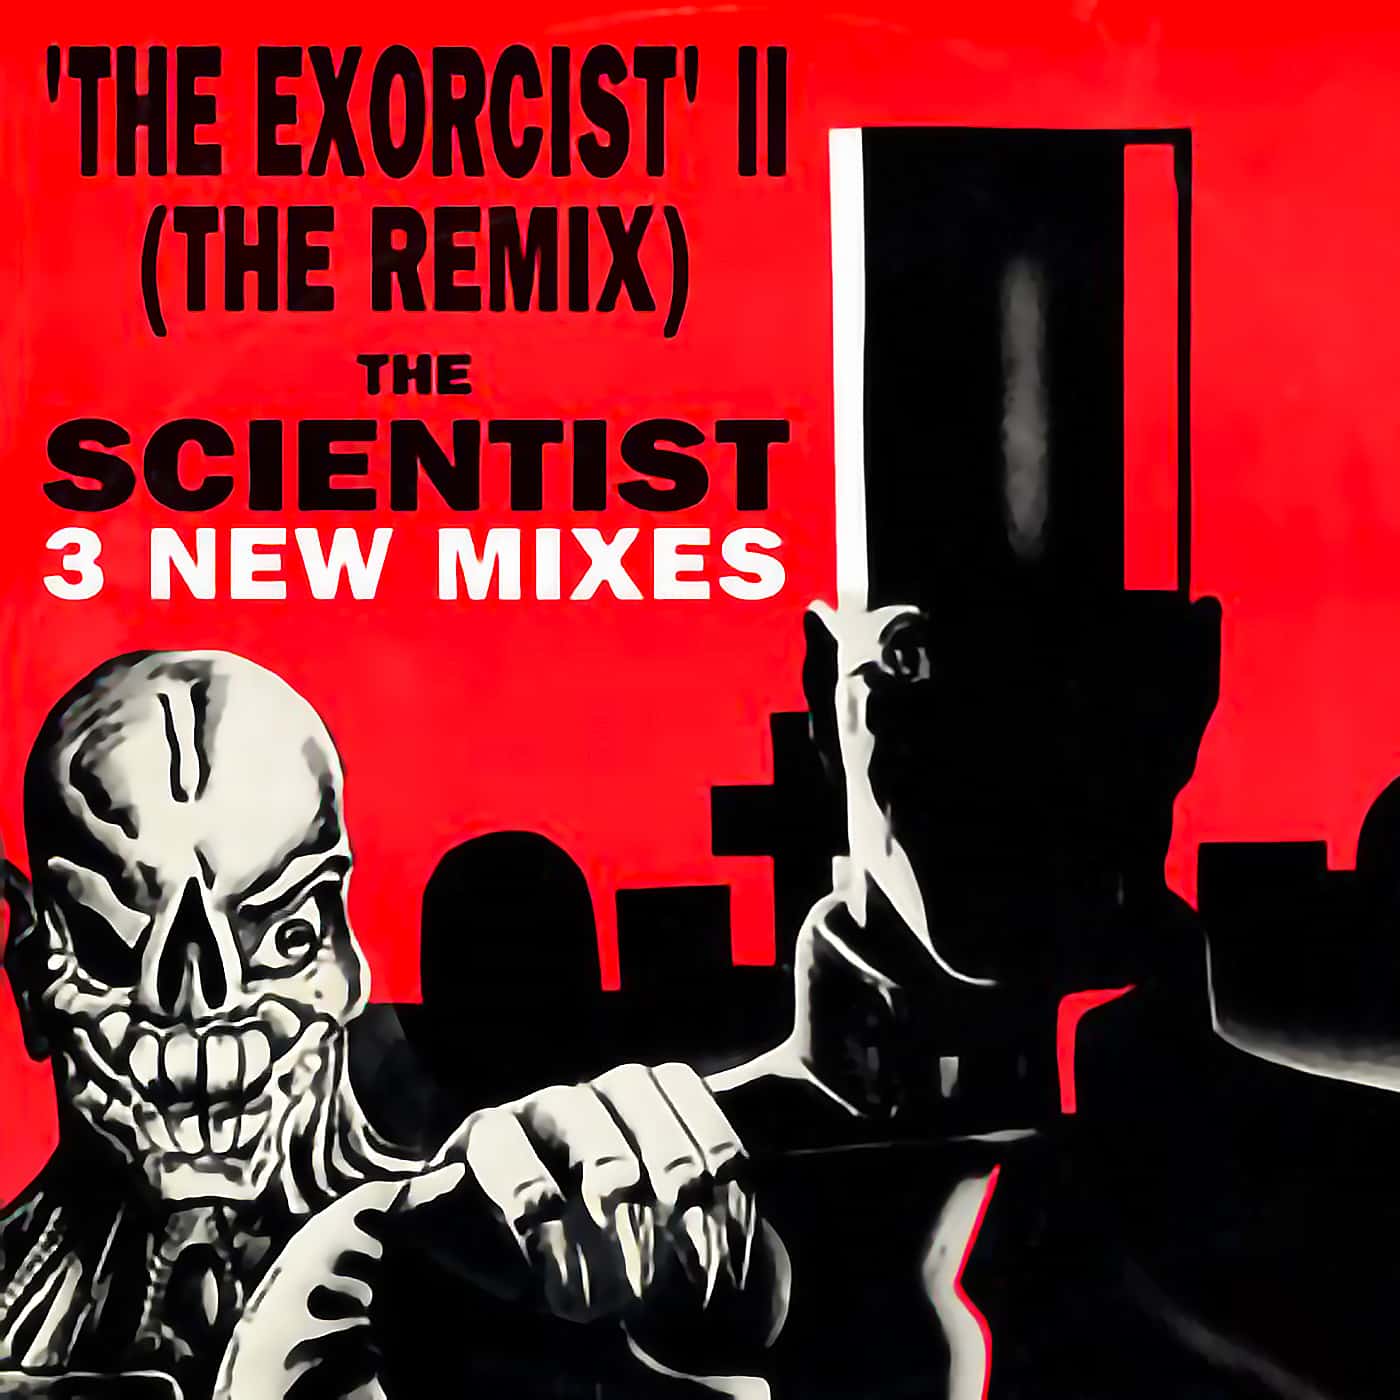 Download The Exorcist II (The Remix) on Electrobuzz